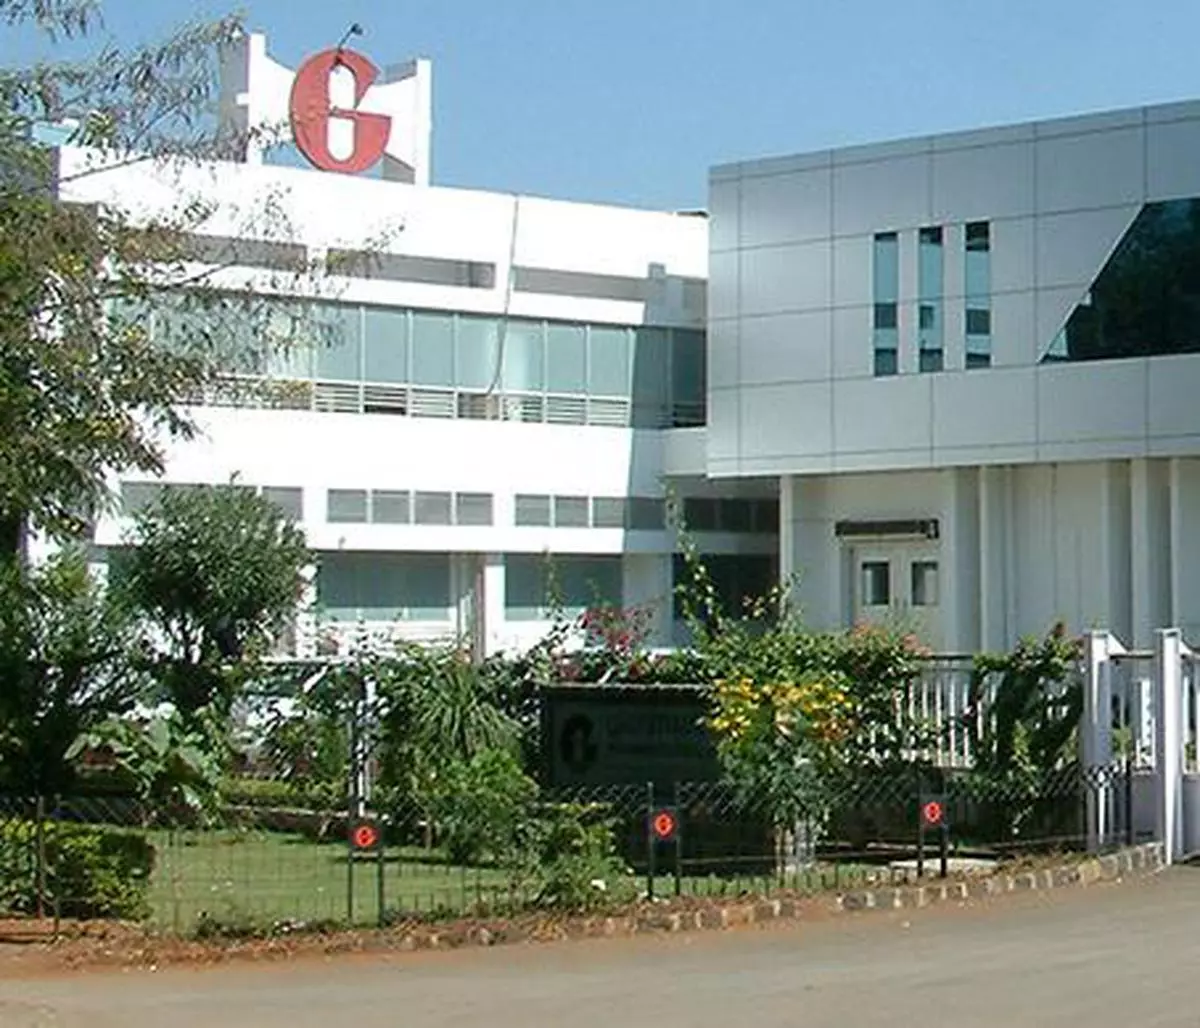 Shares of Glenmark Pharmaceuticals fell over 3 per cent on Tuesday after the company said the US health regulator has made seven observations post an audit at its Baddi manufacturing unit. The stock closed at ₹571.8 on the BSE